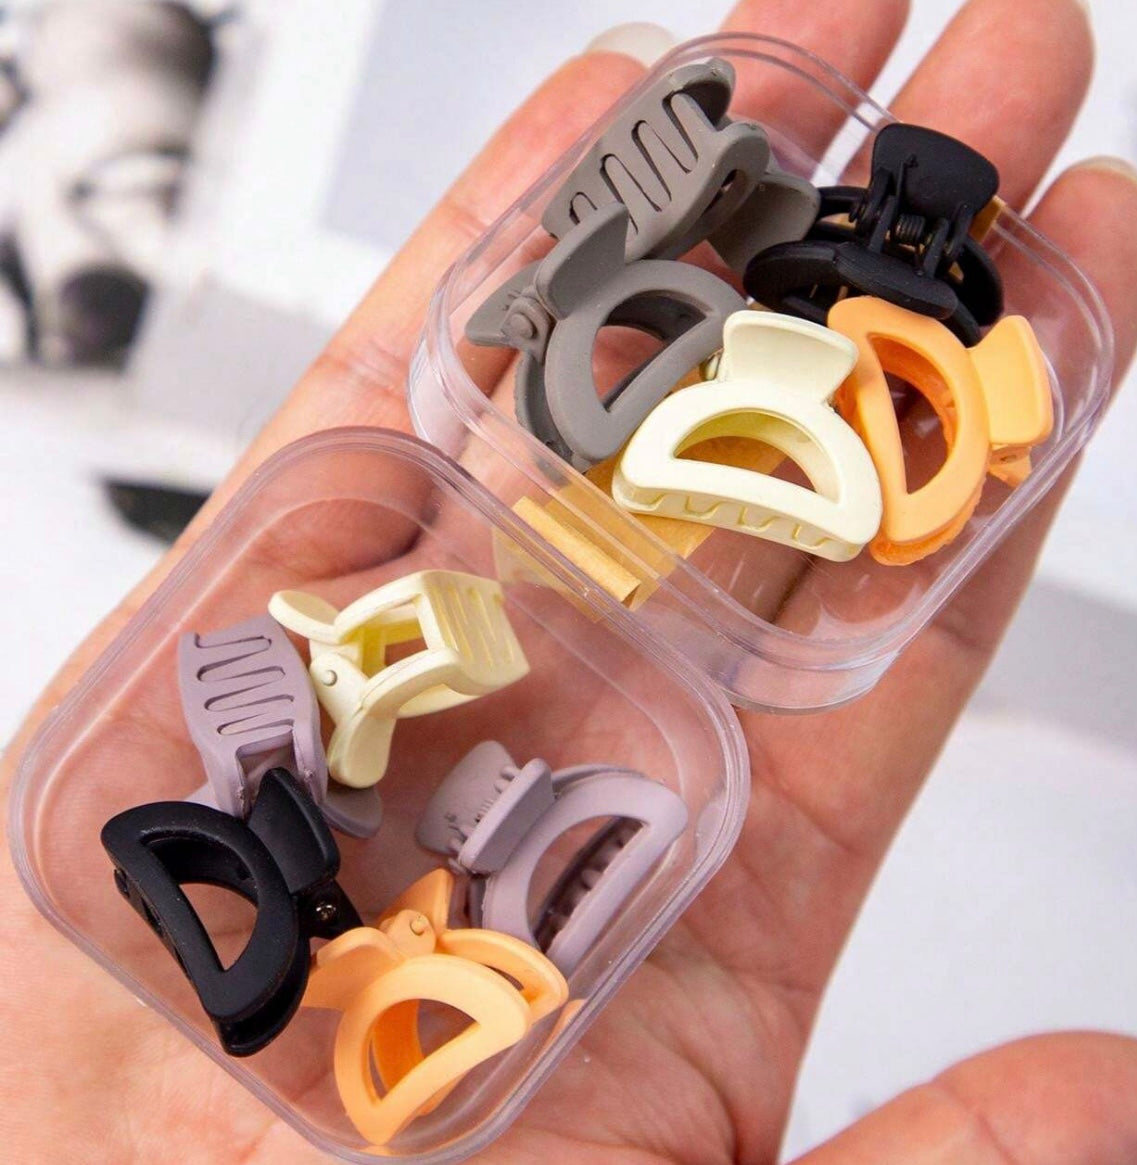 10 Small Neutral Coloured Claw Clips in plastic tub